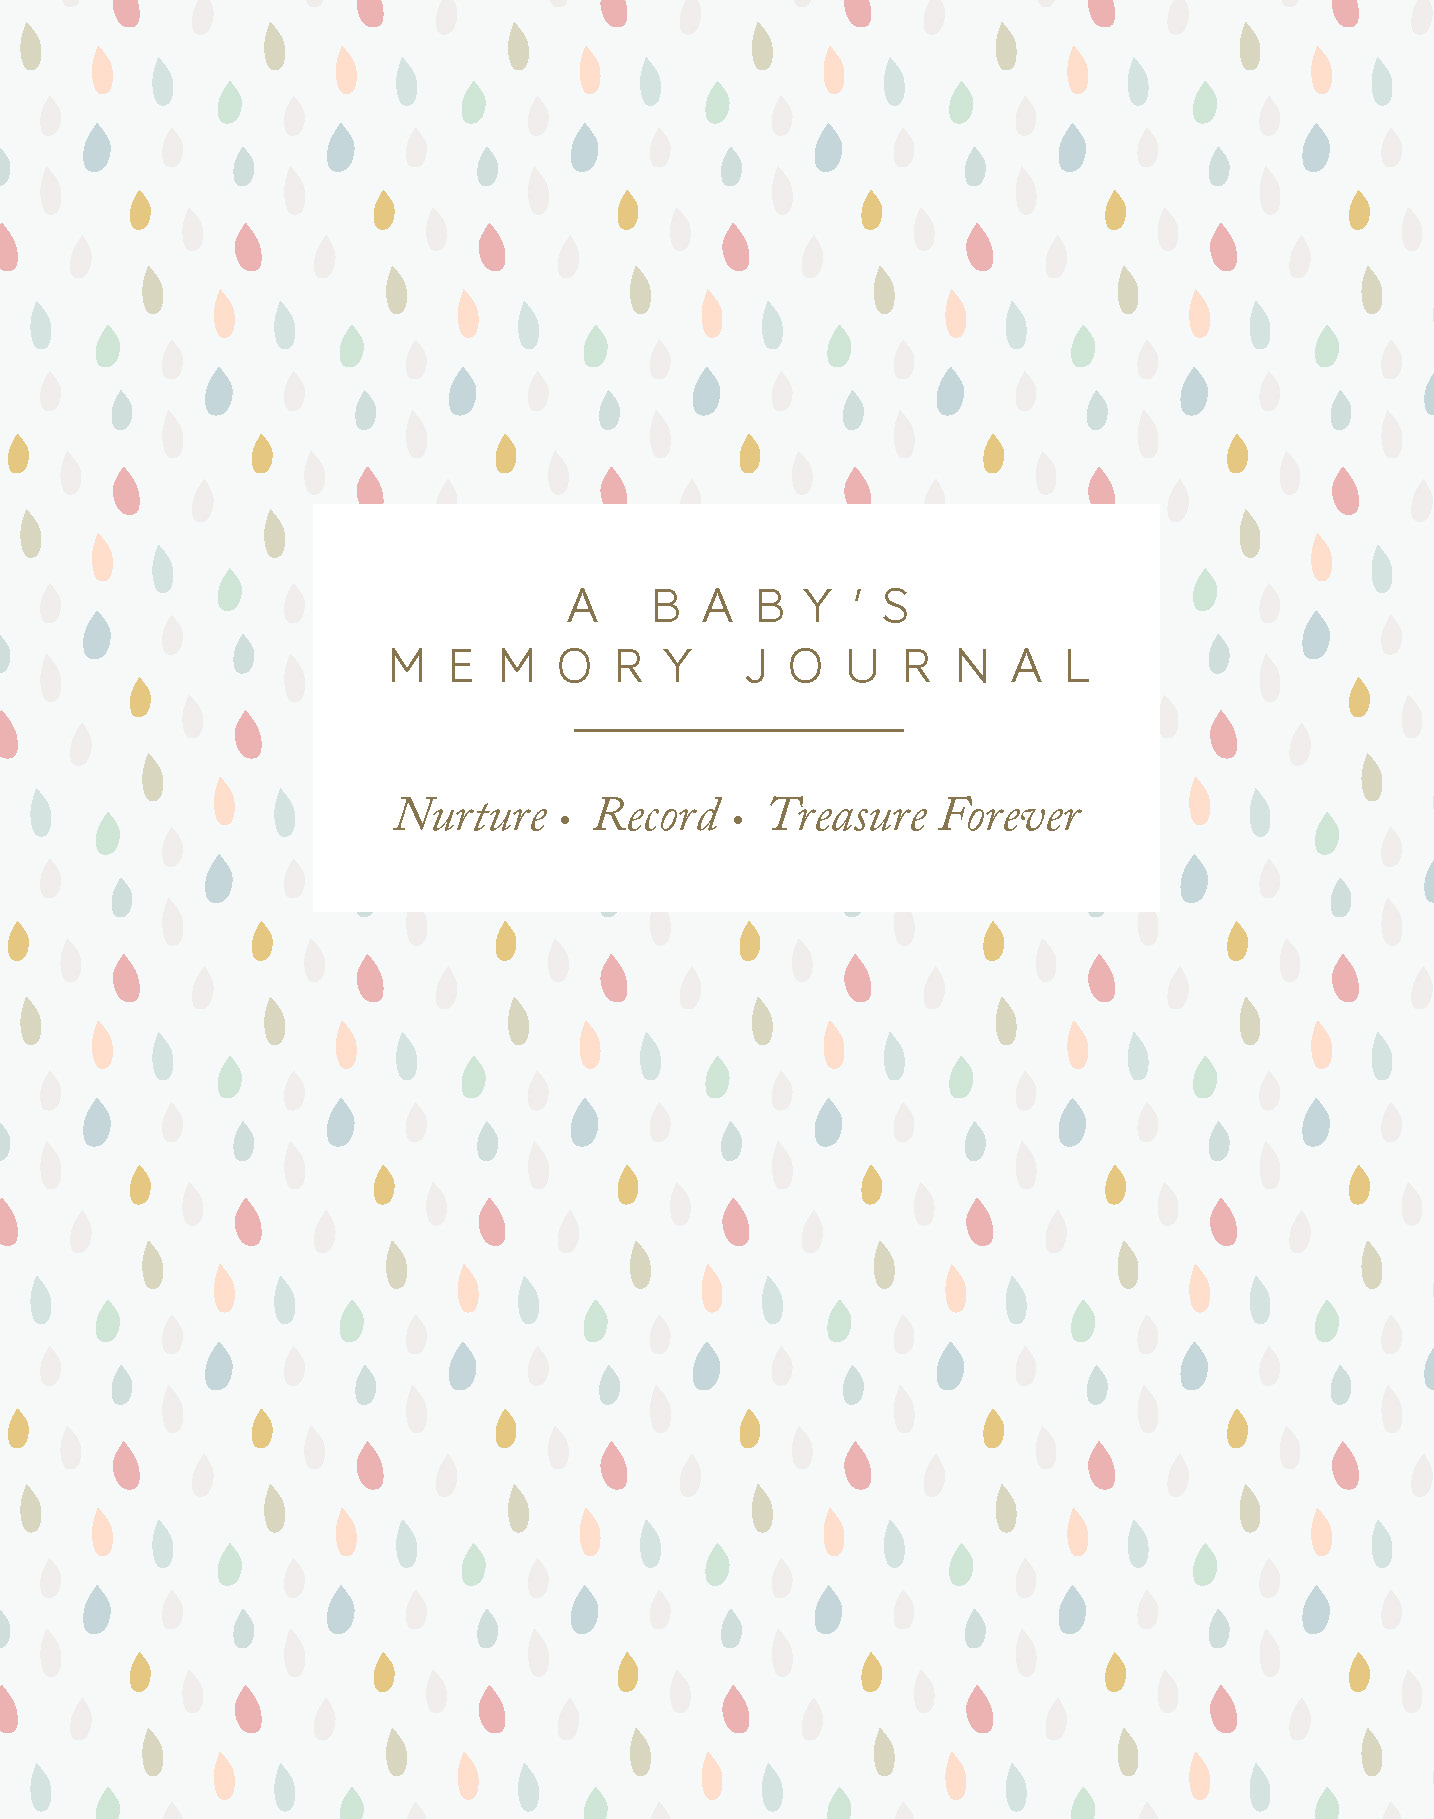 A Baby’s Memory Journal